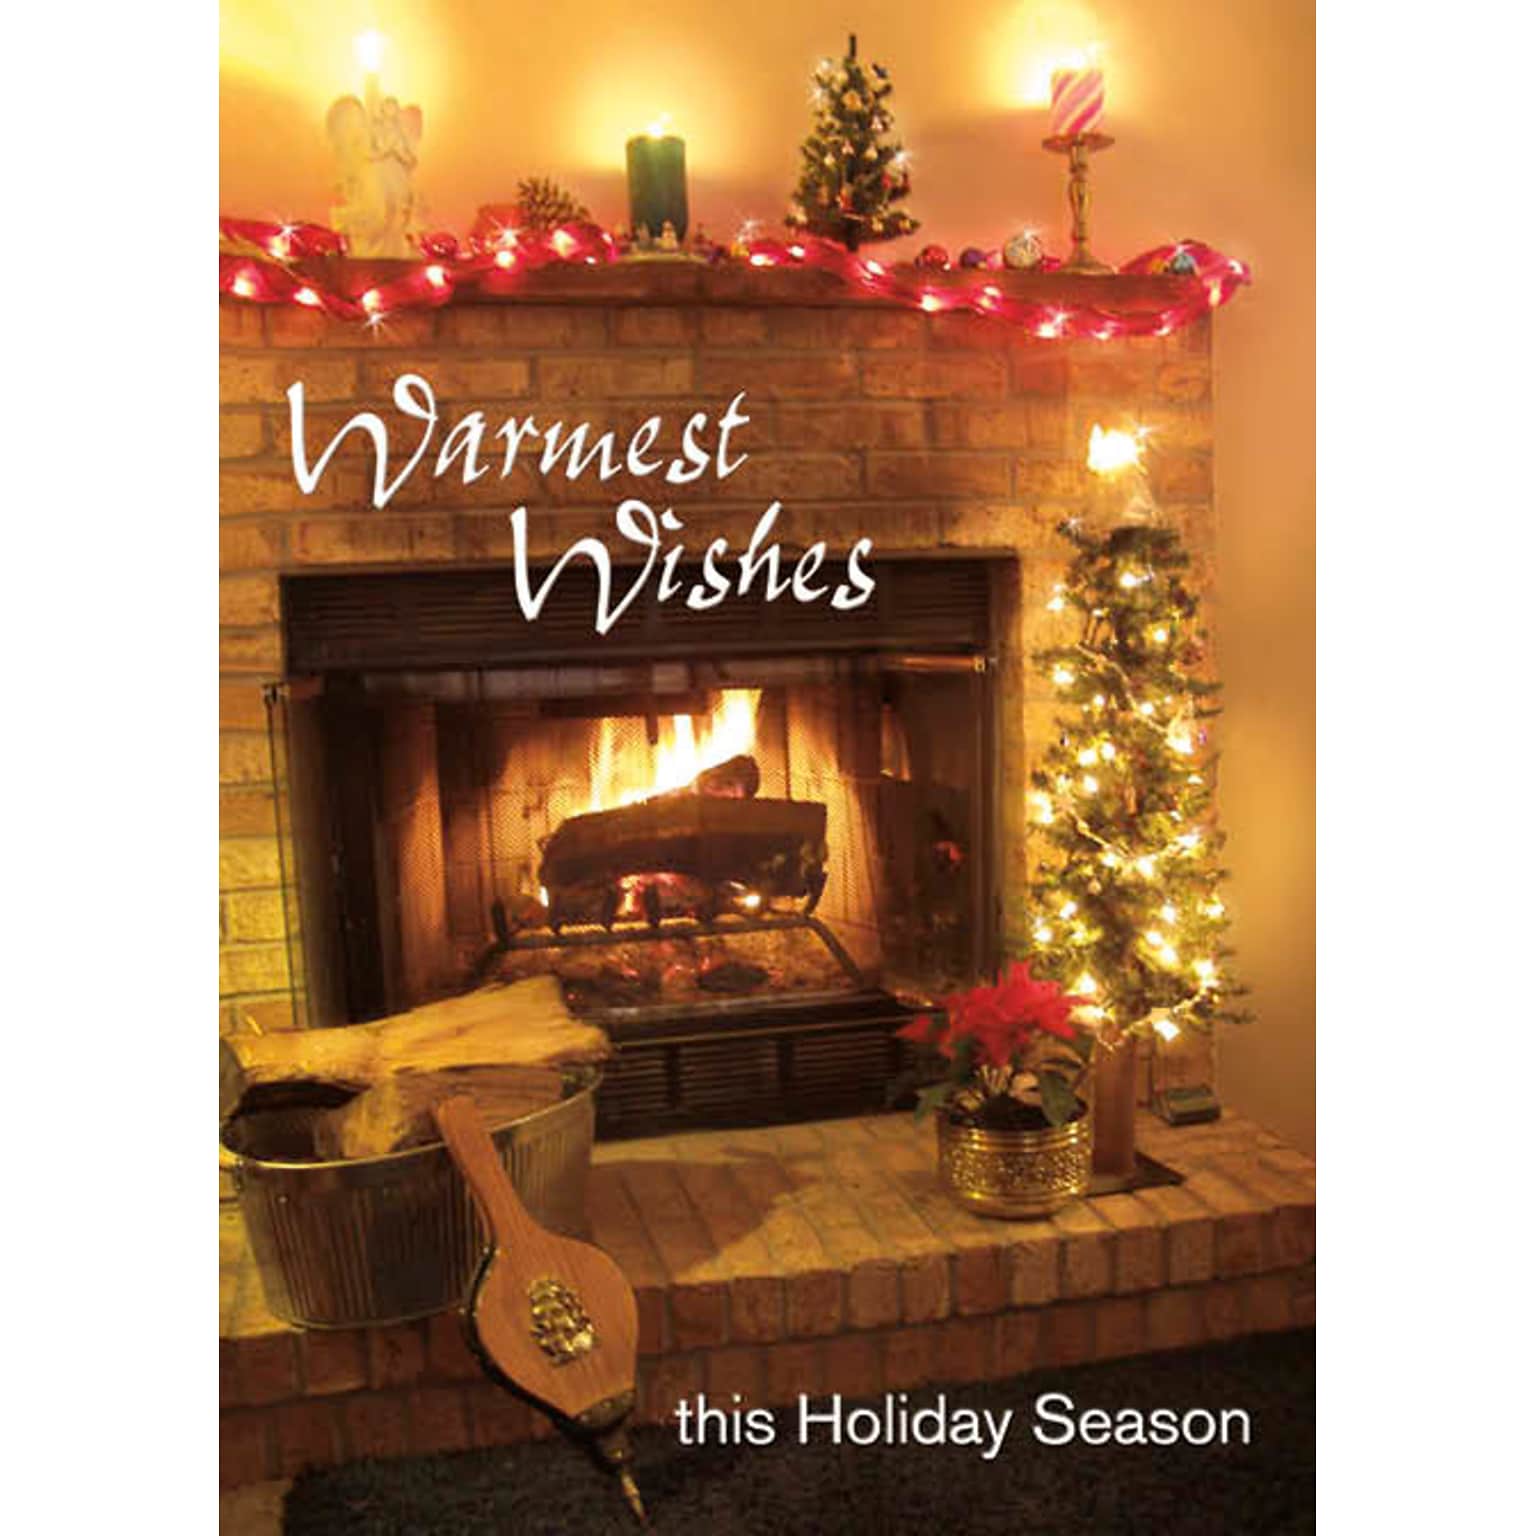 Warmest Wishes This Holiday Season Fire Place Holiday Greeting Cards, With A7 Envelopes, 7 x 5, 25 Cards per Set